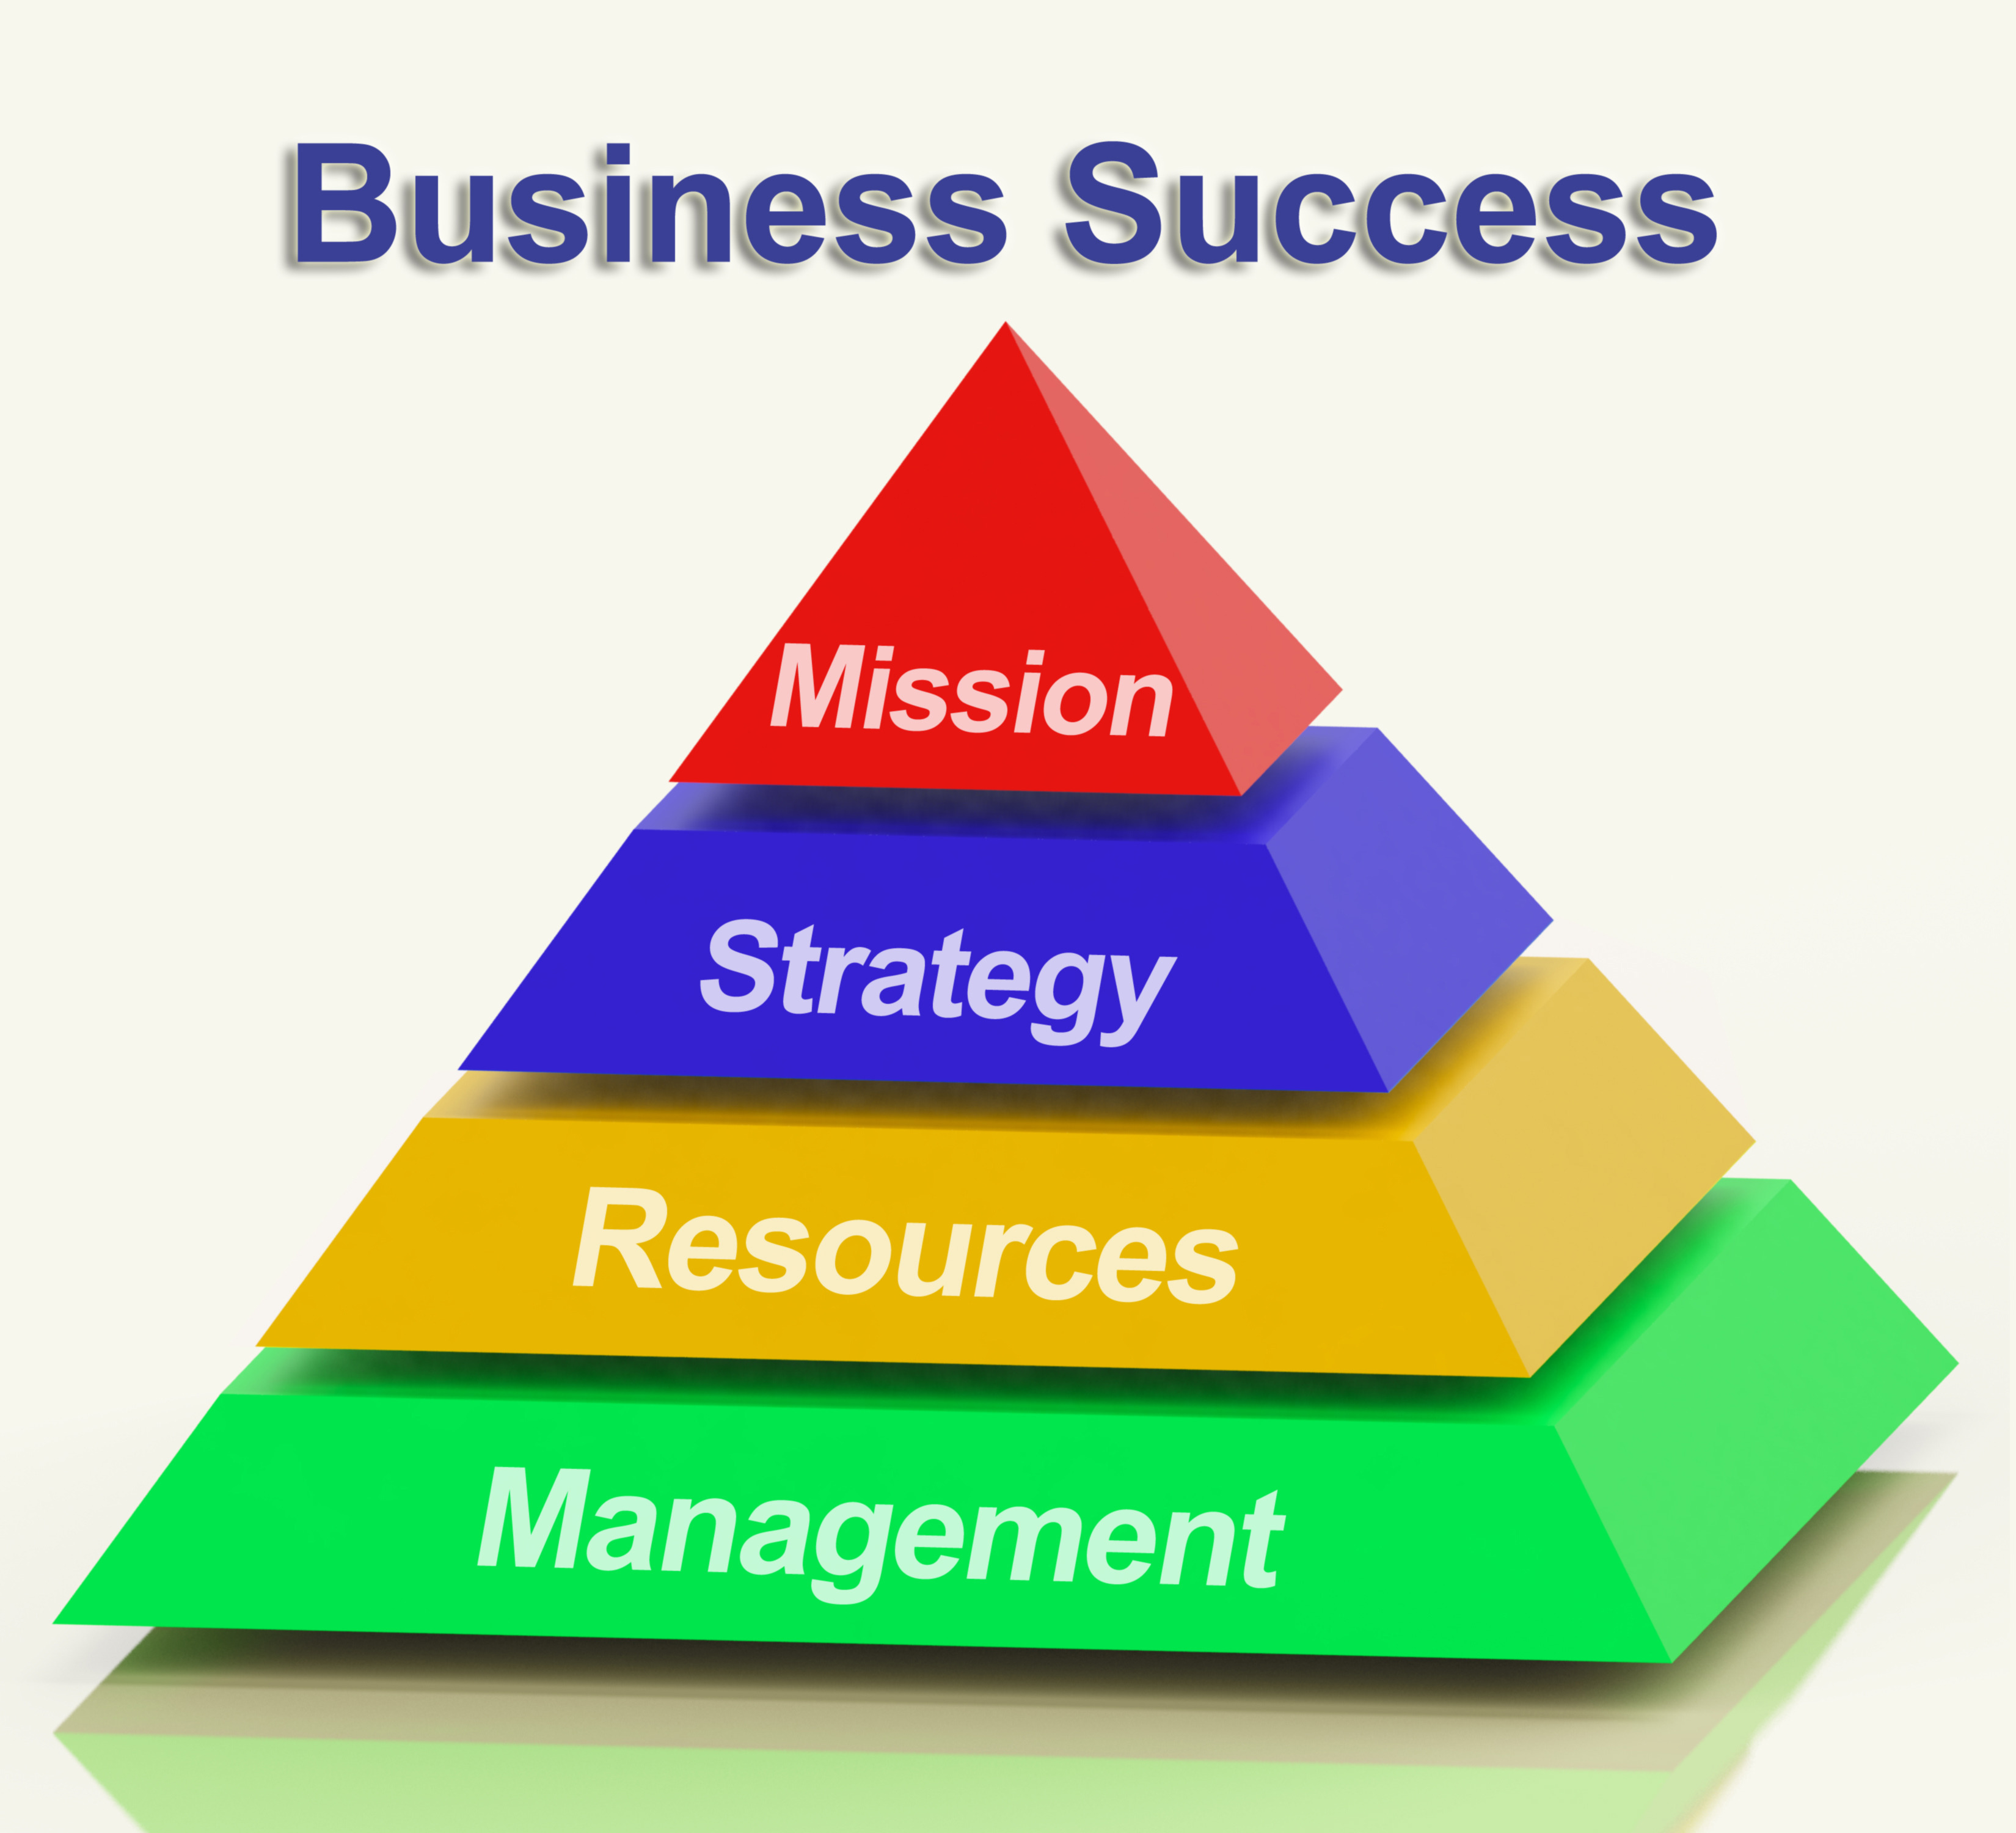 successful business plans generally share which of these characteristics)